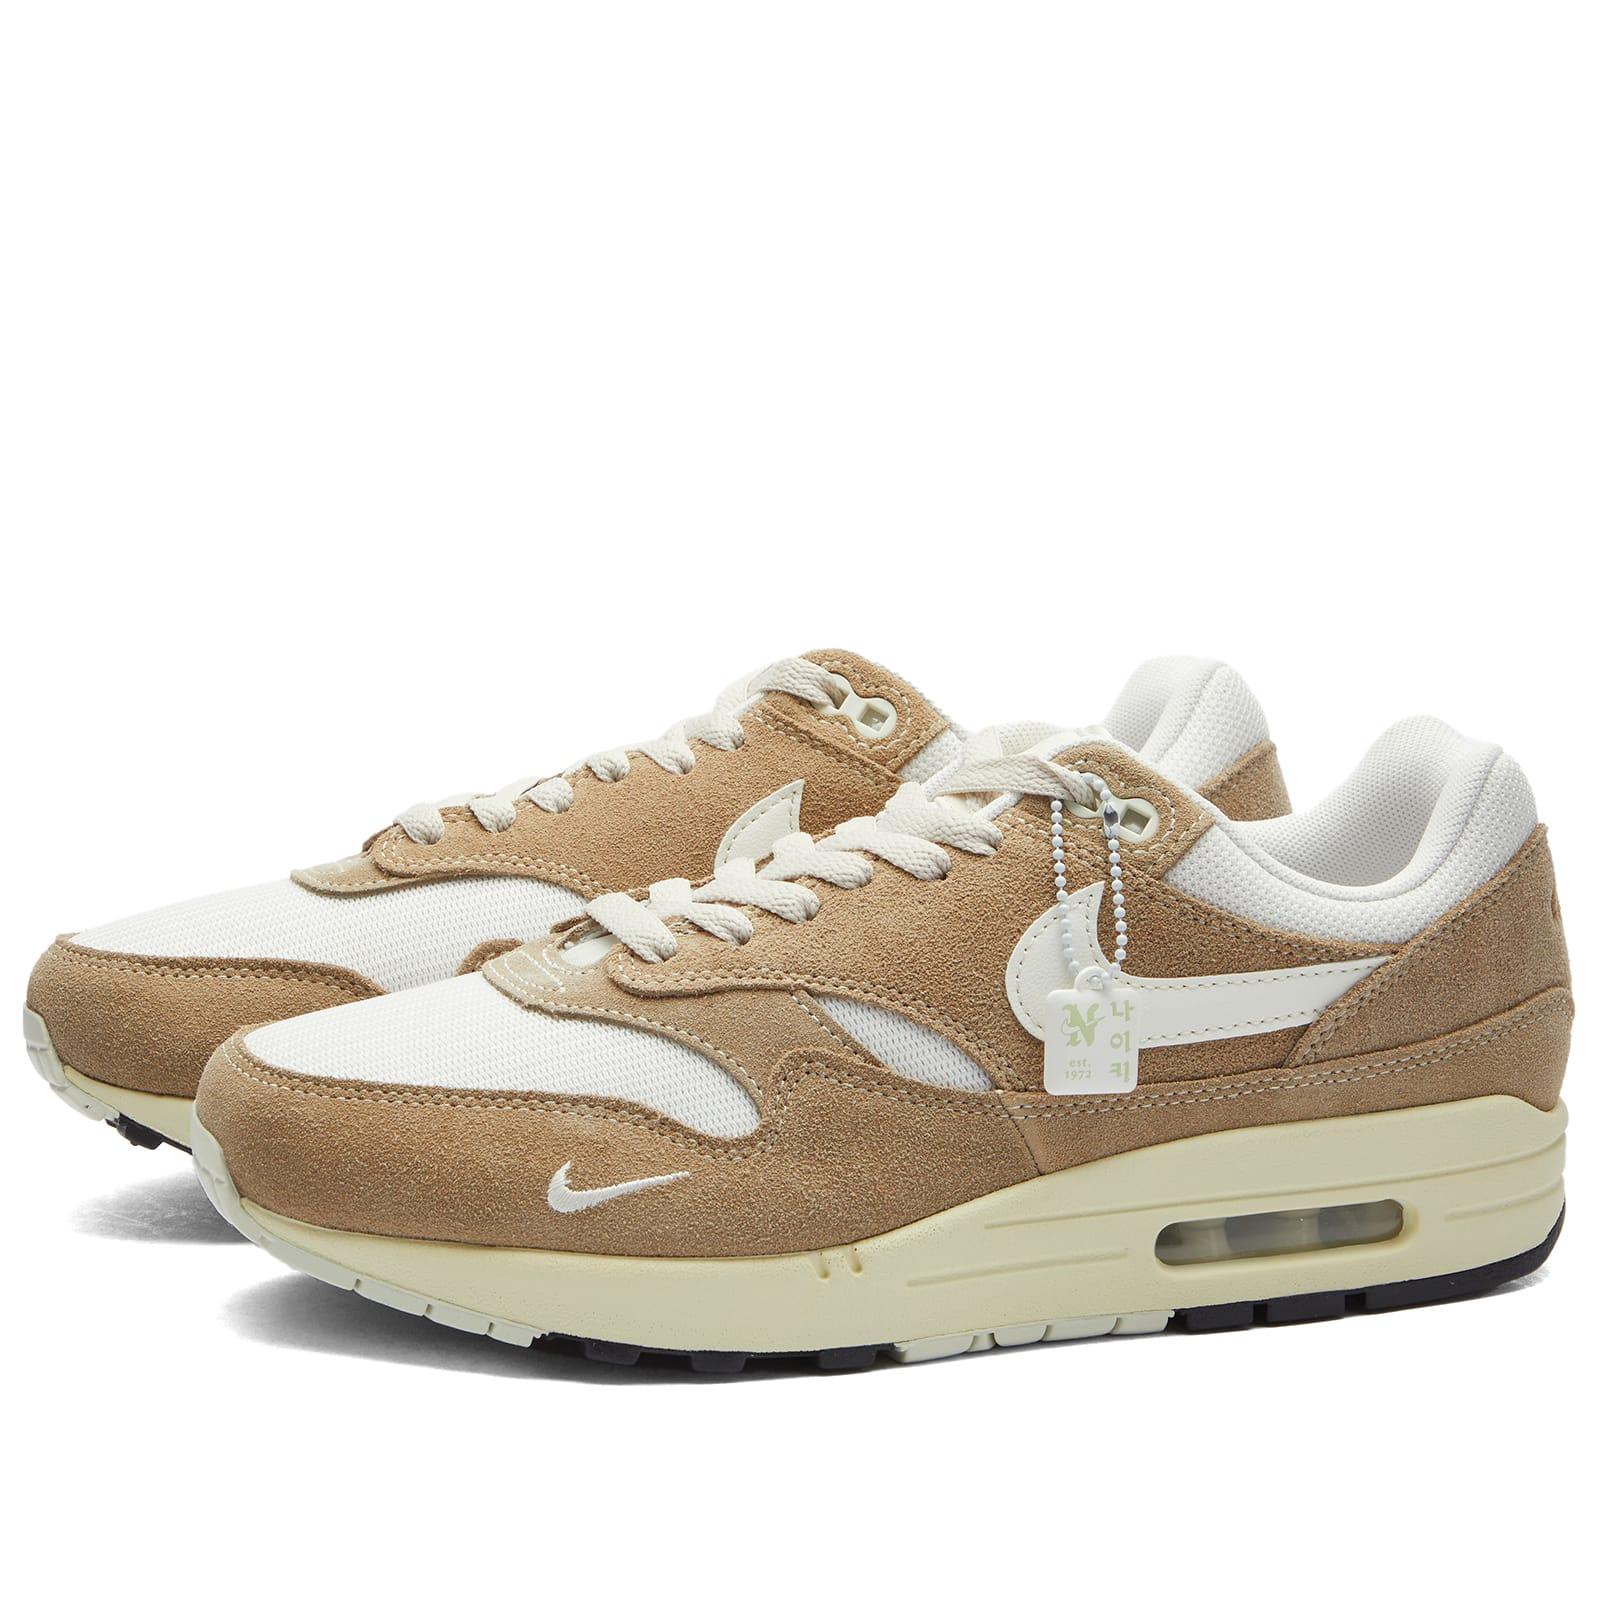 Nike Air Max 1 '87 Se W Sneakers in White | Lyst